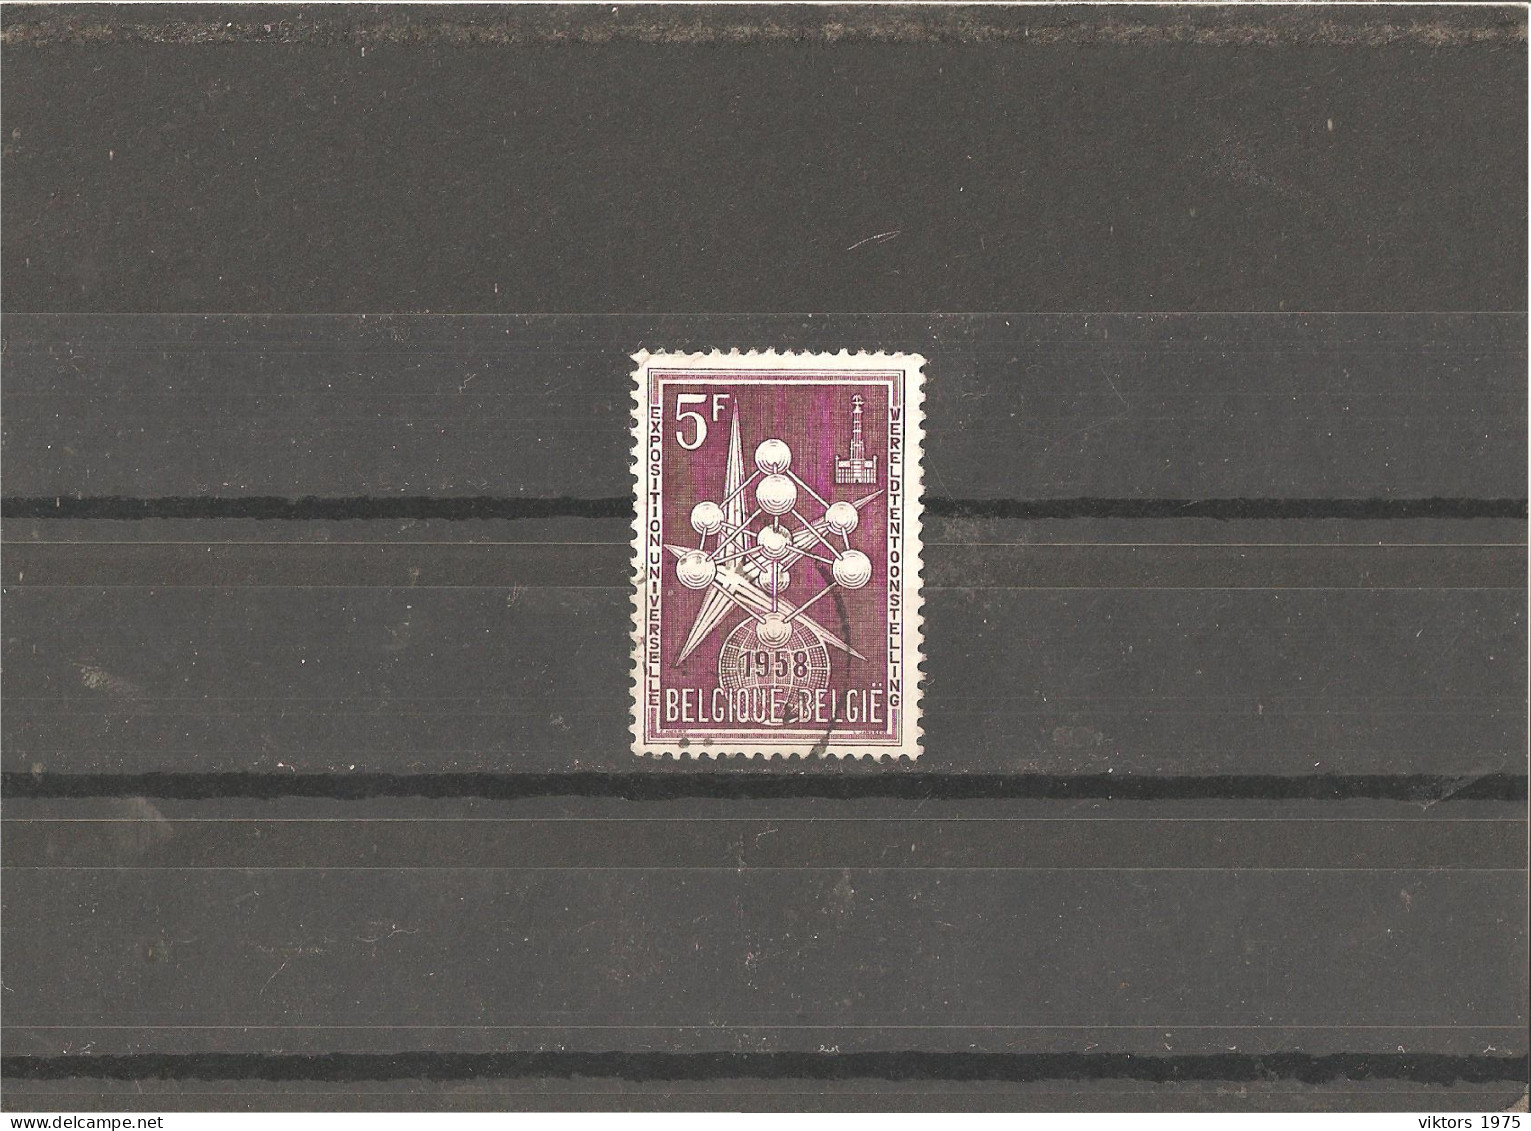 Used Stamp Nr.1092 In MICHEL Catalog - Used Stamps